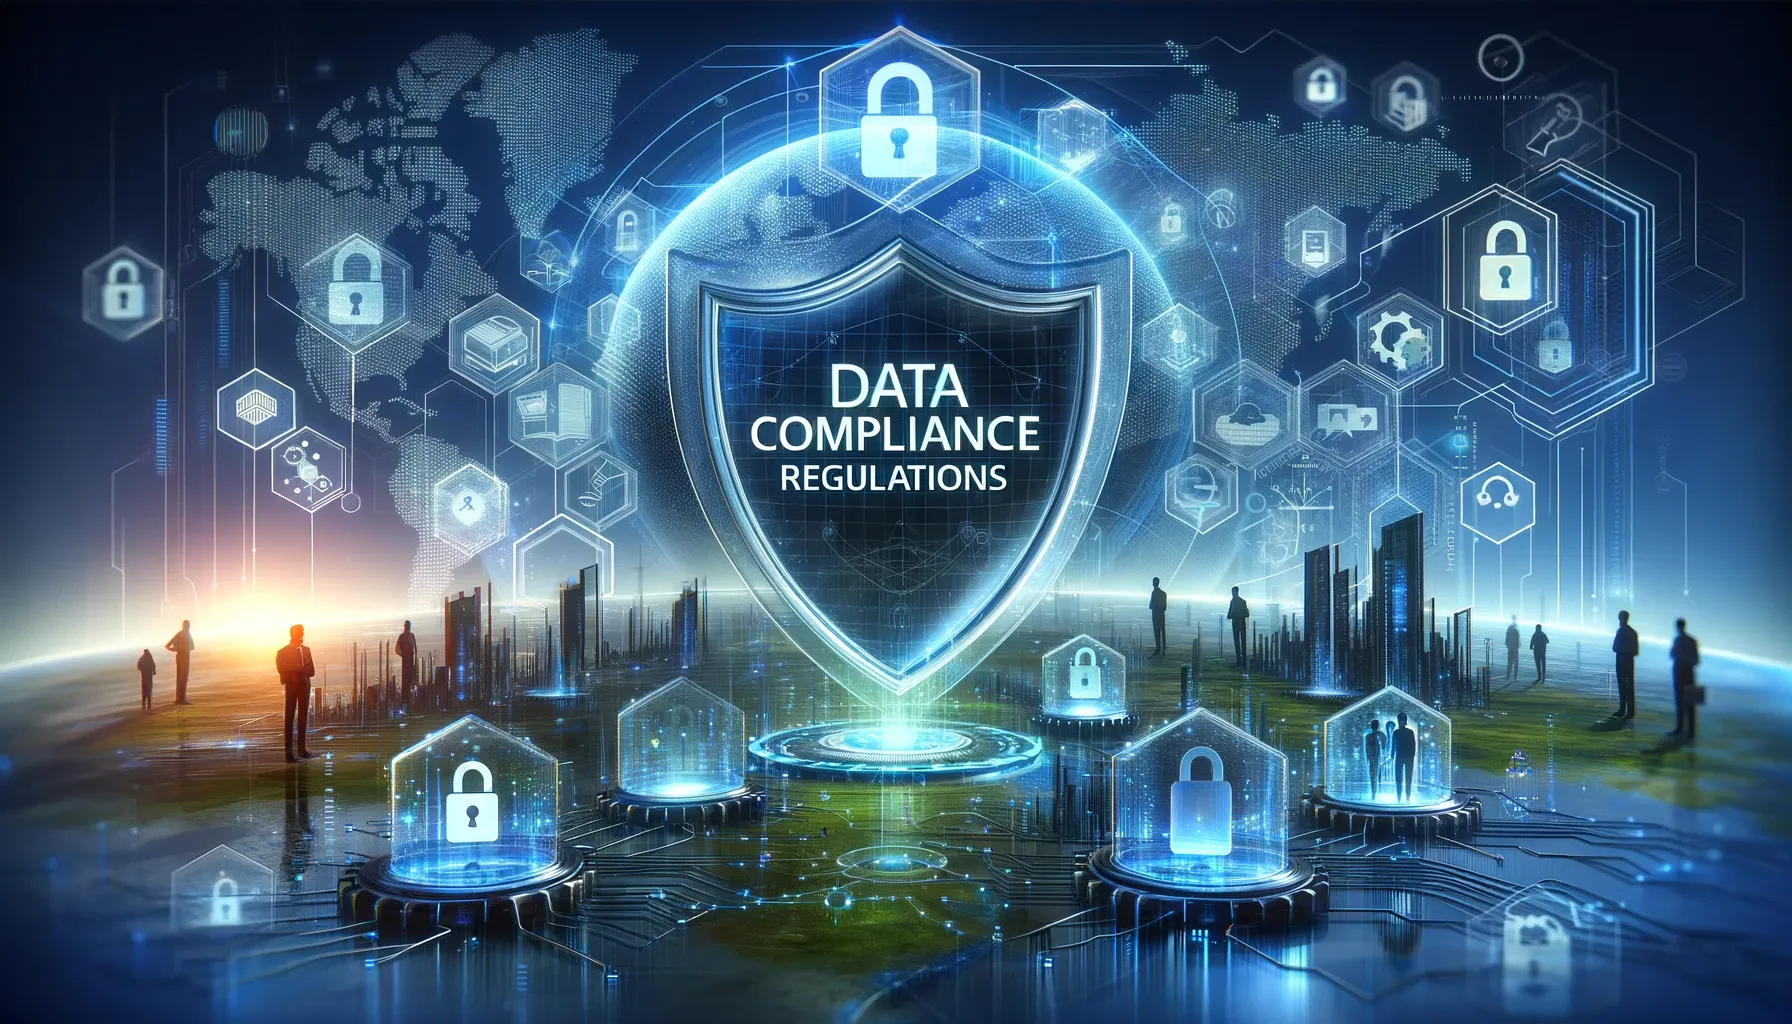 The Impact of Data Compliance Regulations on Consumer Privacy and Trust